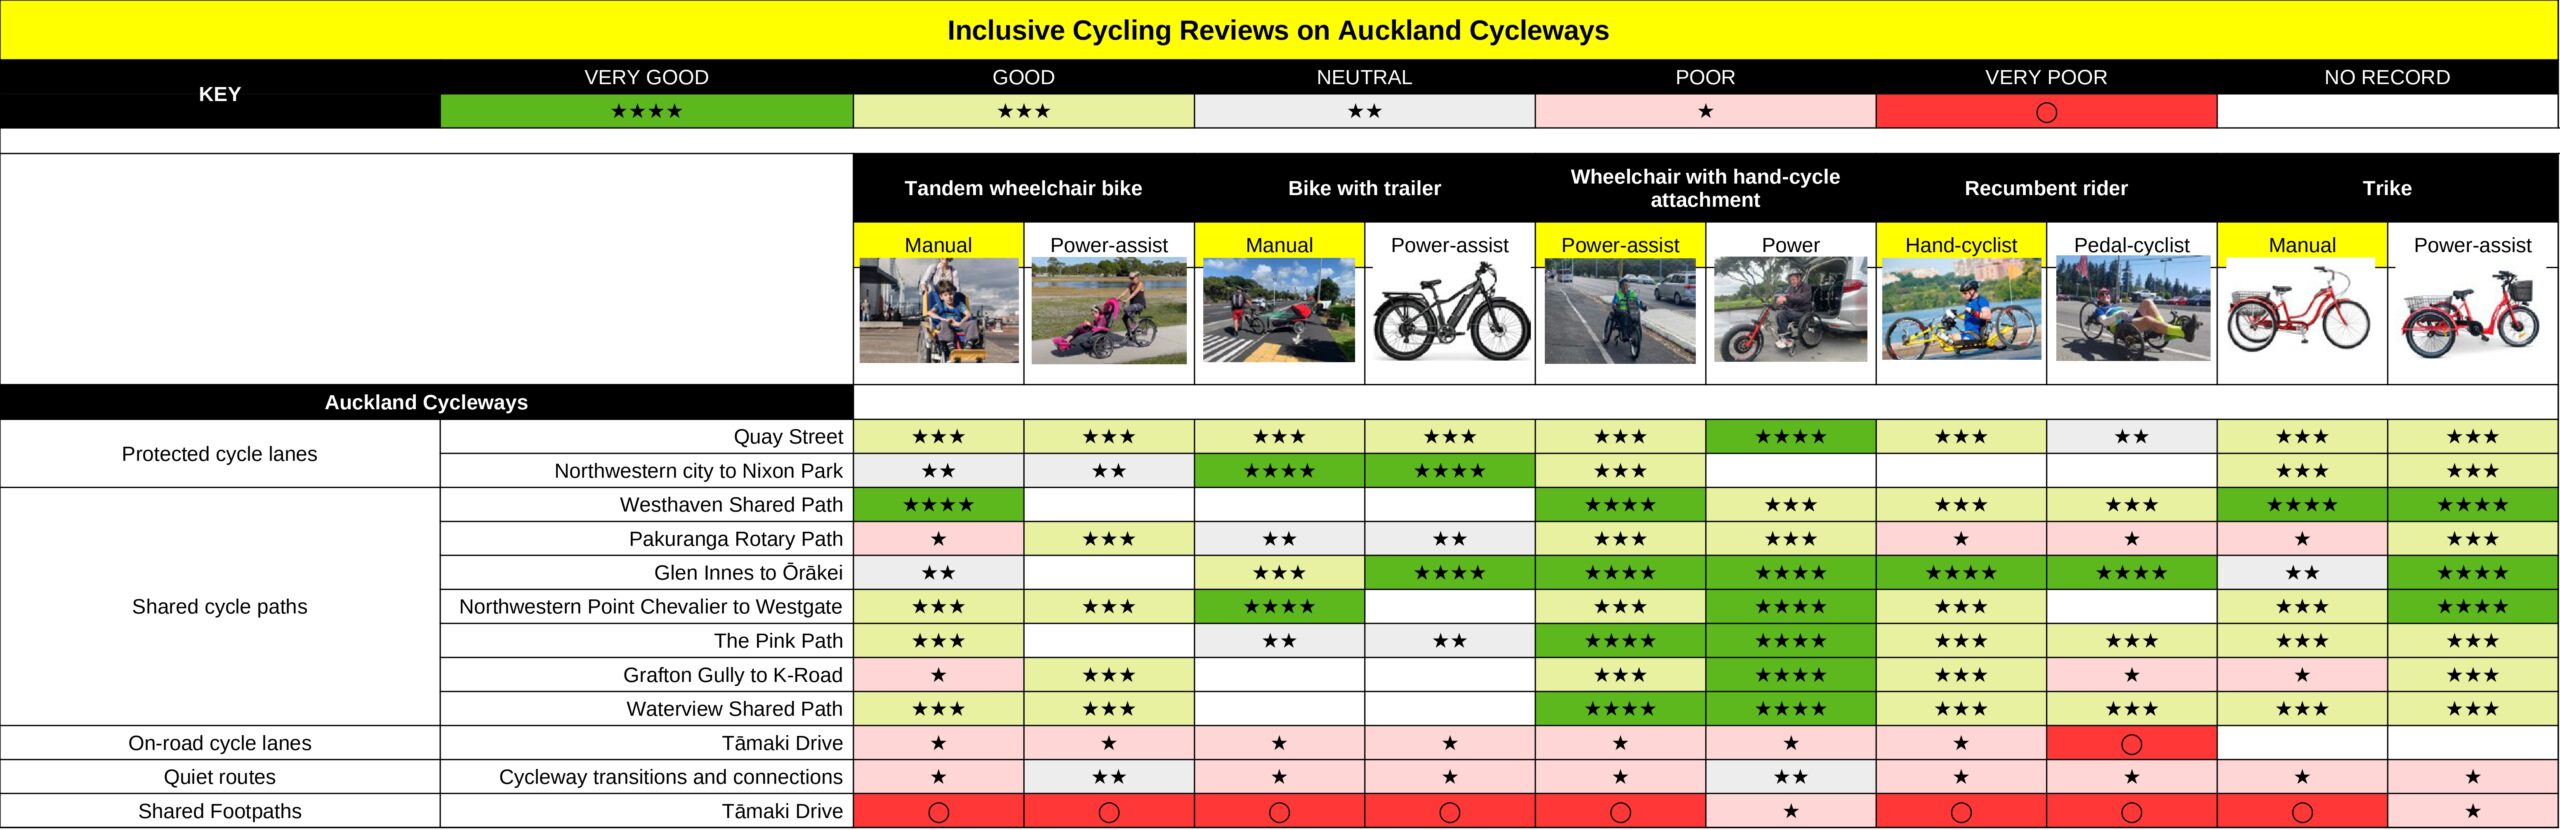 Inclusive Cycling Reviews on Auckland Cycleways. This table is large, the summary is that the Tāmaki Drive shared footpaths scored the worst for access for all bike types. Tāmaki Drive on road cycle lanes and cycleway transitions and connections on quiet routes also scored very badly across all bike types. Glen Innes to Ōrākei (Te Ara ki Uta ki Tai) scored the best across all bike types. Pakuranga Rotary path scored neutral poor, with a small smatterings of good depending on the bike type. The remaining cycle routes - Quay street, Northwestern to Nixon Park, Westhaven shared path, Northwestern Point Chevalier to Westgate, the Pink Path, Grafton Gully, and Waterview Shared Path - all scored reasonably okay, or neutral across bike types, with the power assist wheelchair attachments generally giving higher scores across these pathways. 